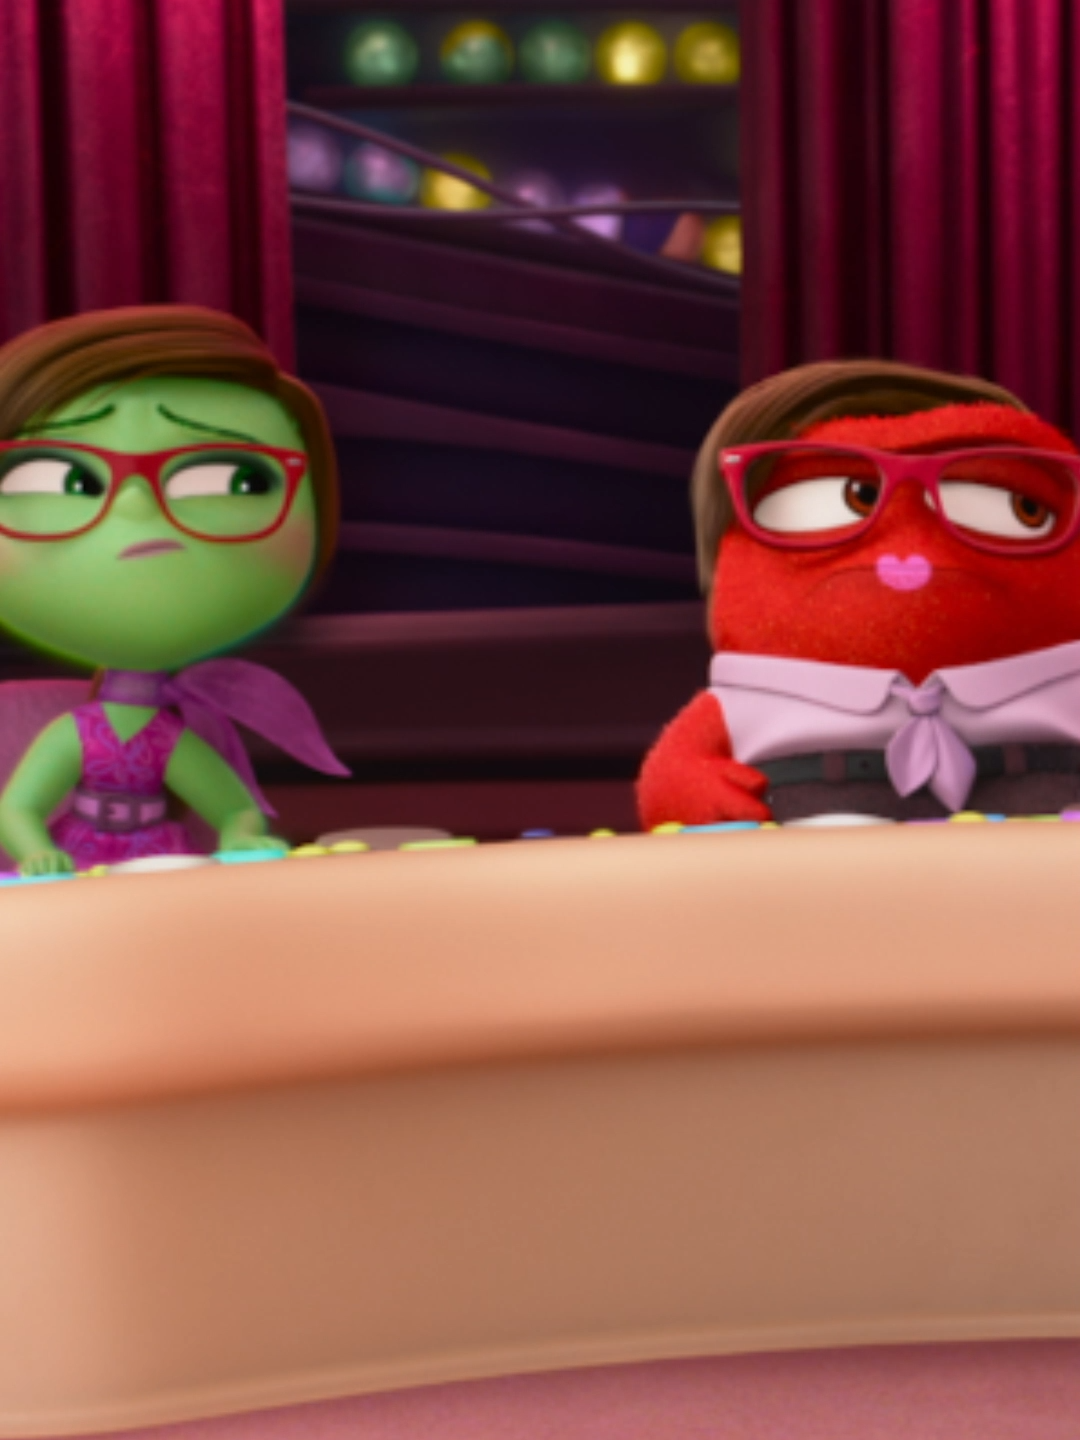 Make sure to give mom her flowers 💐 See Disney & Pixar's #InsideOut2,only in theaters June 14!